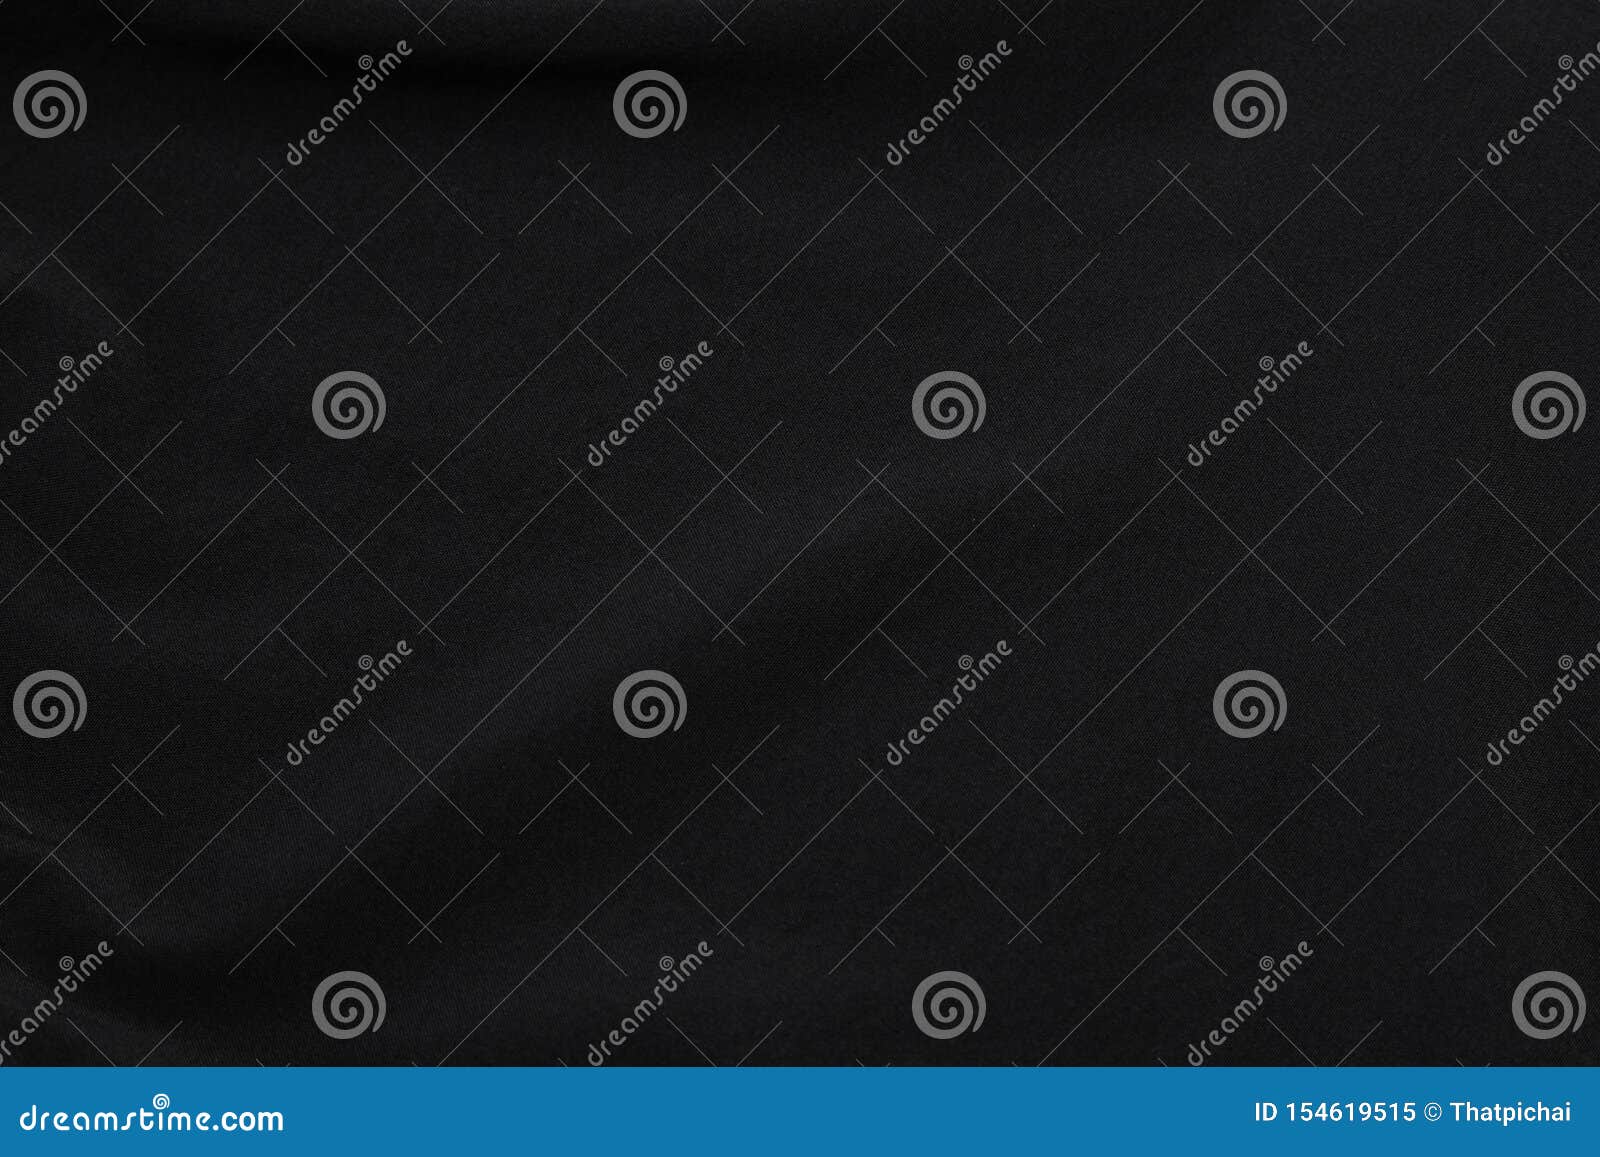 Black Fabric Texture, Cloth Pattern Background. Stock Image - Image of ...